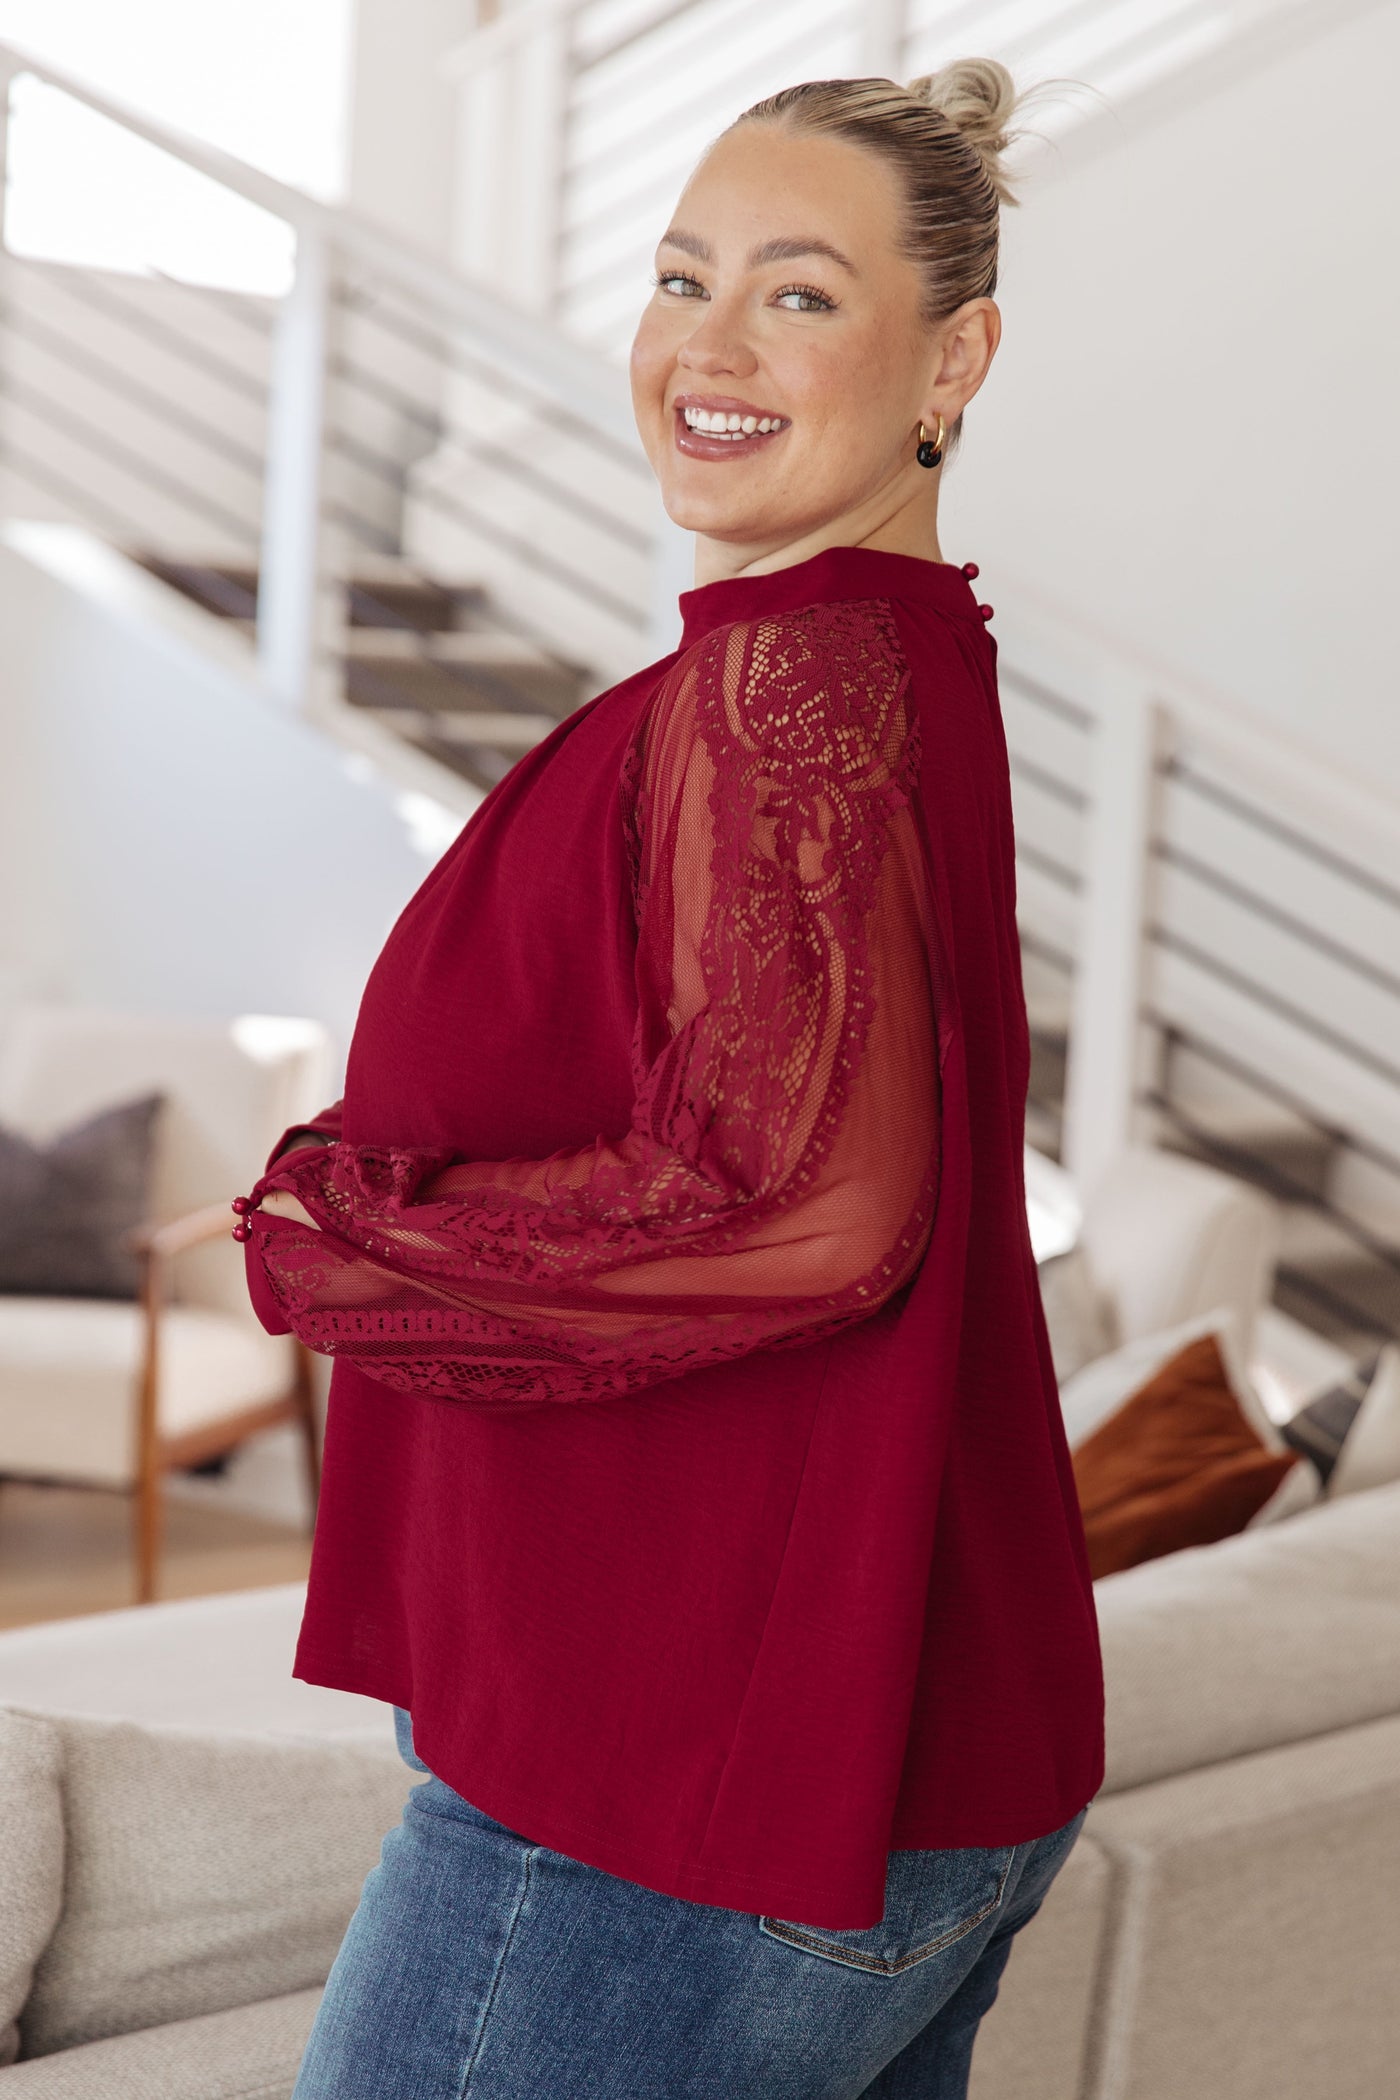 Lace on My Sleeves Blouse|Corner Stone Spa Boutique-Womens- Corner Stone Spa and Salon Boutique in Stoughton, Wisconsin